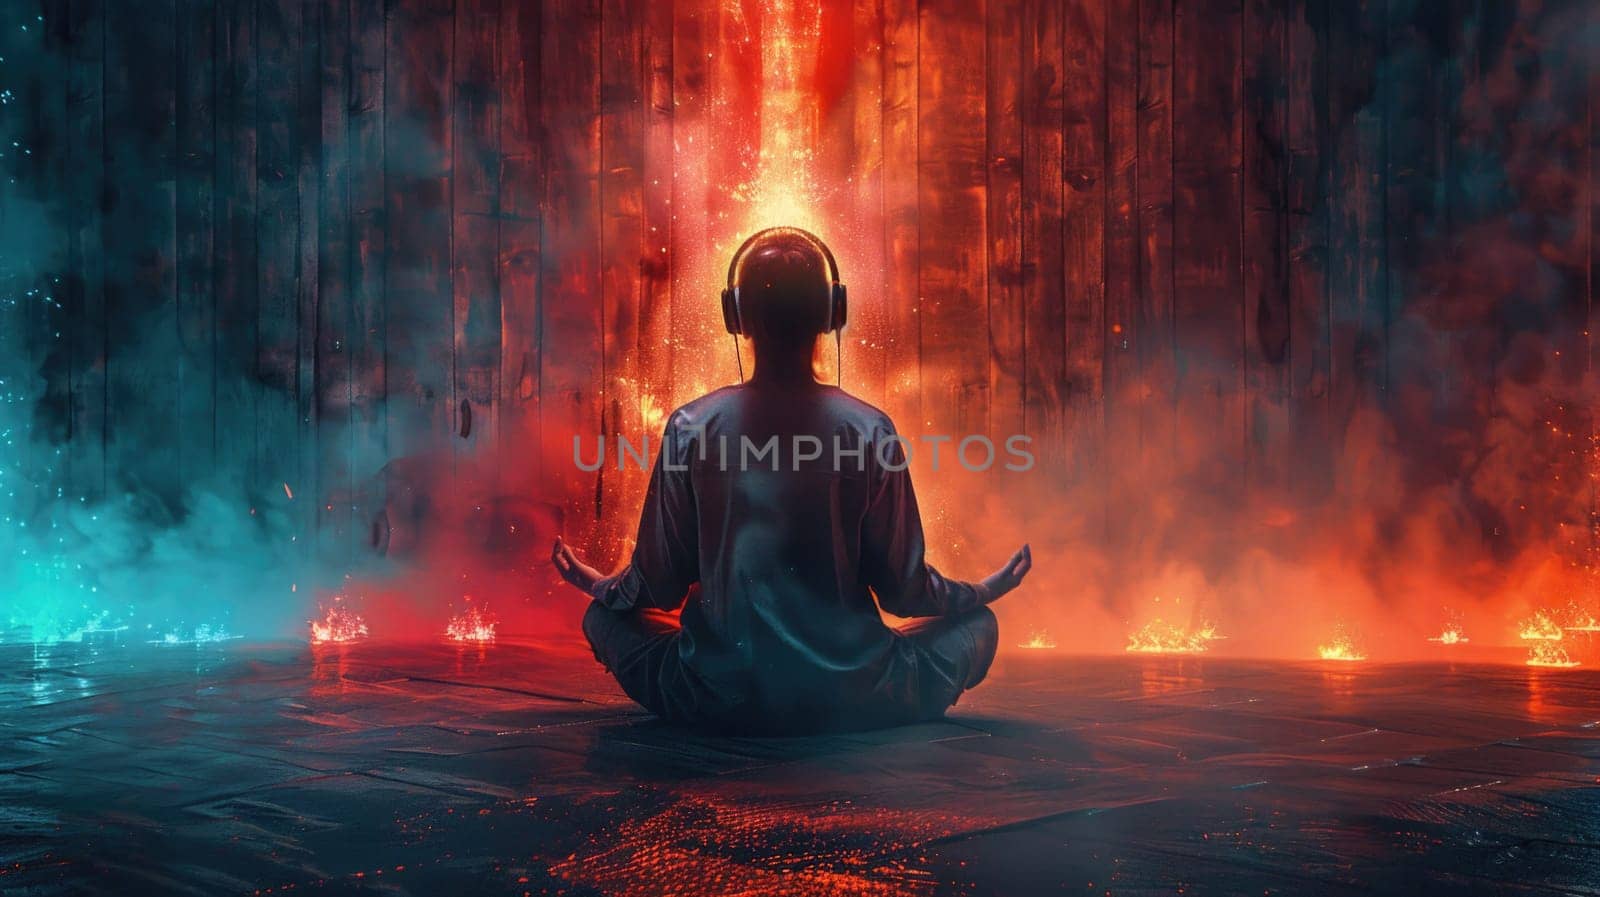 A person is seated in a lotus position in front of a crackling fire, demonstrating a focused and meditative posture.